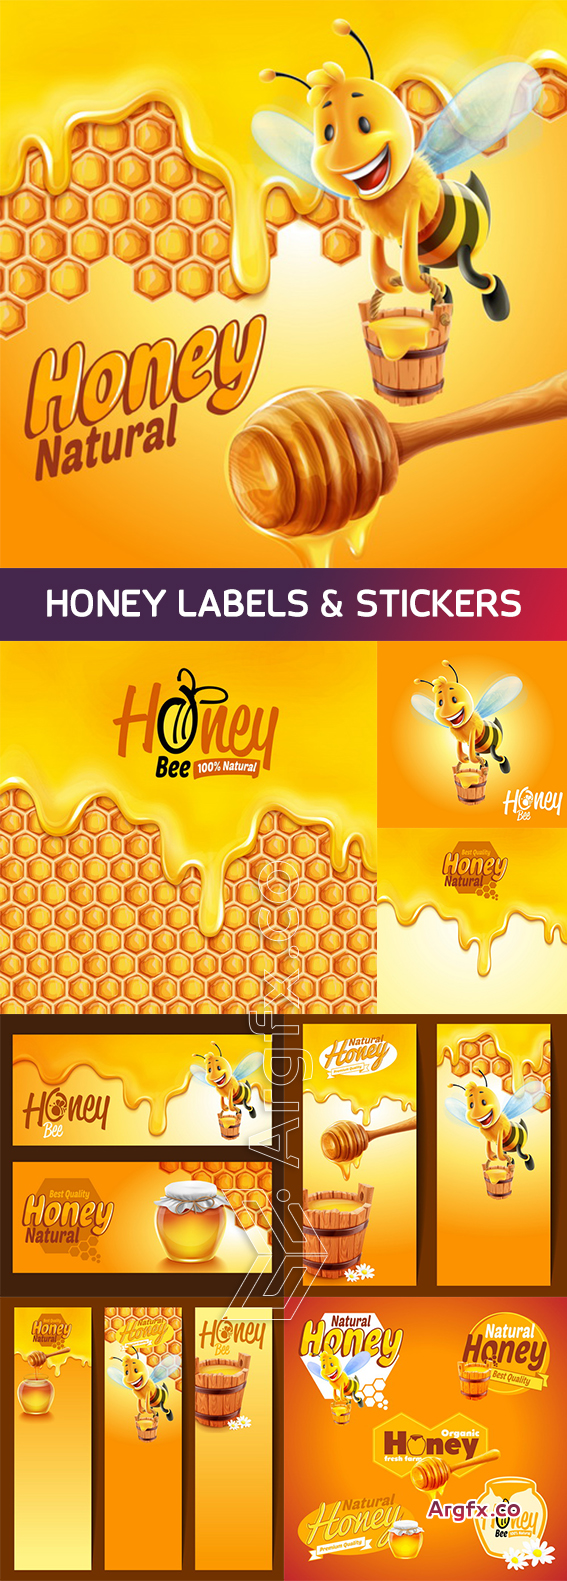  Honey Labels & Stickers, Frame Honey with Bee & Stick 8xEPS